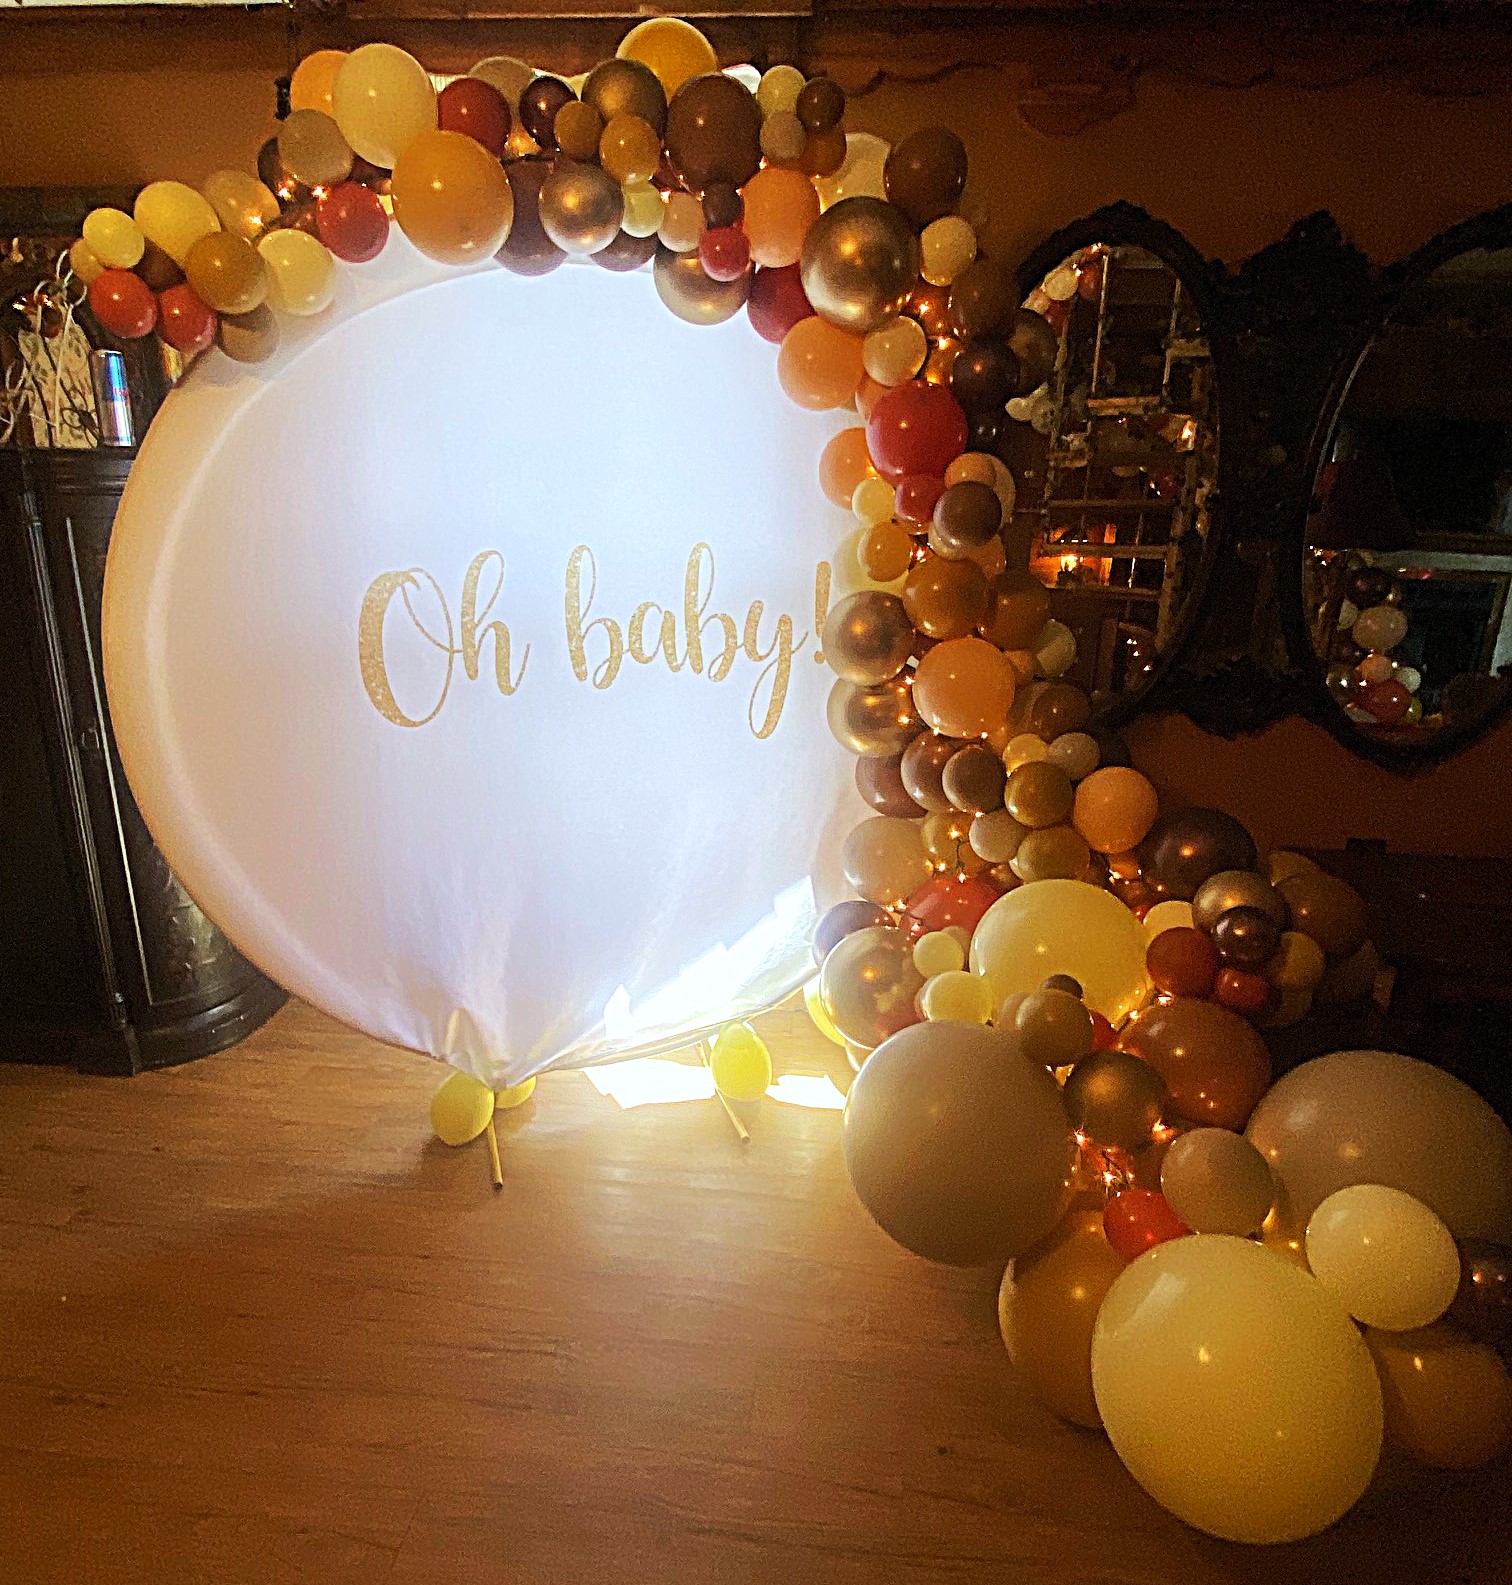 Oh Baby Circle Frame, Baby Shower Balloons, Baby Shower Balloons Pacific MO, Baby Shower Decor St. Louis